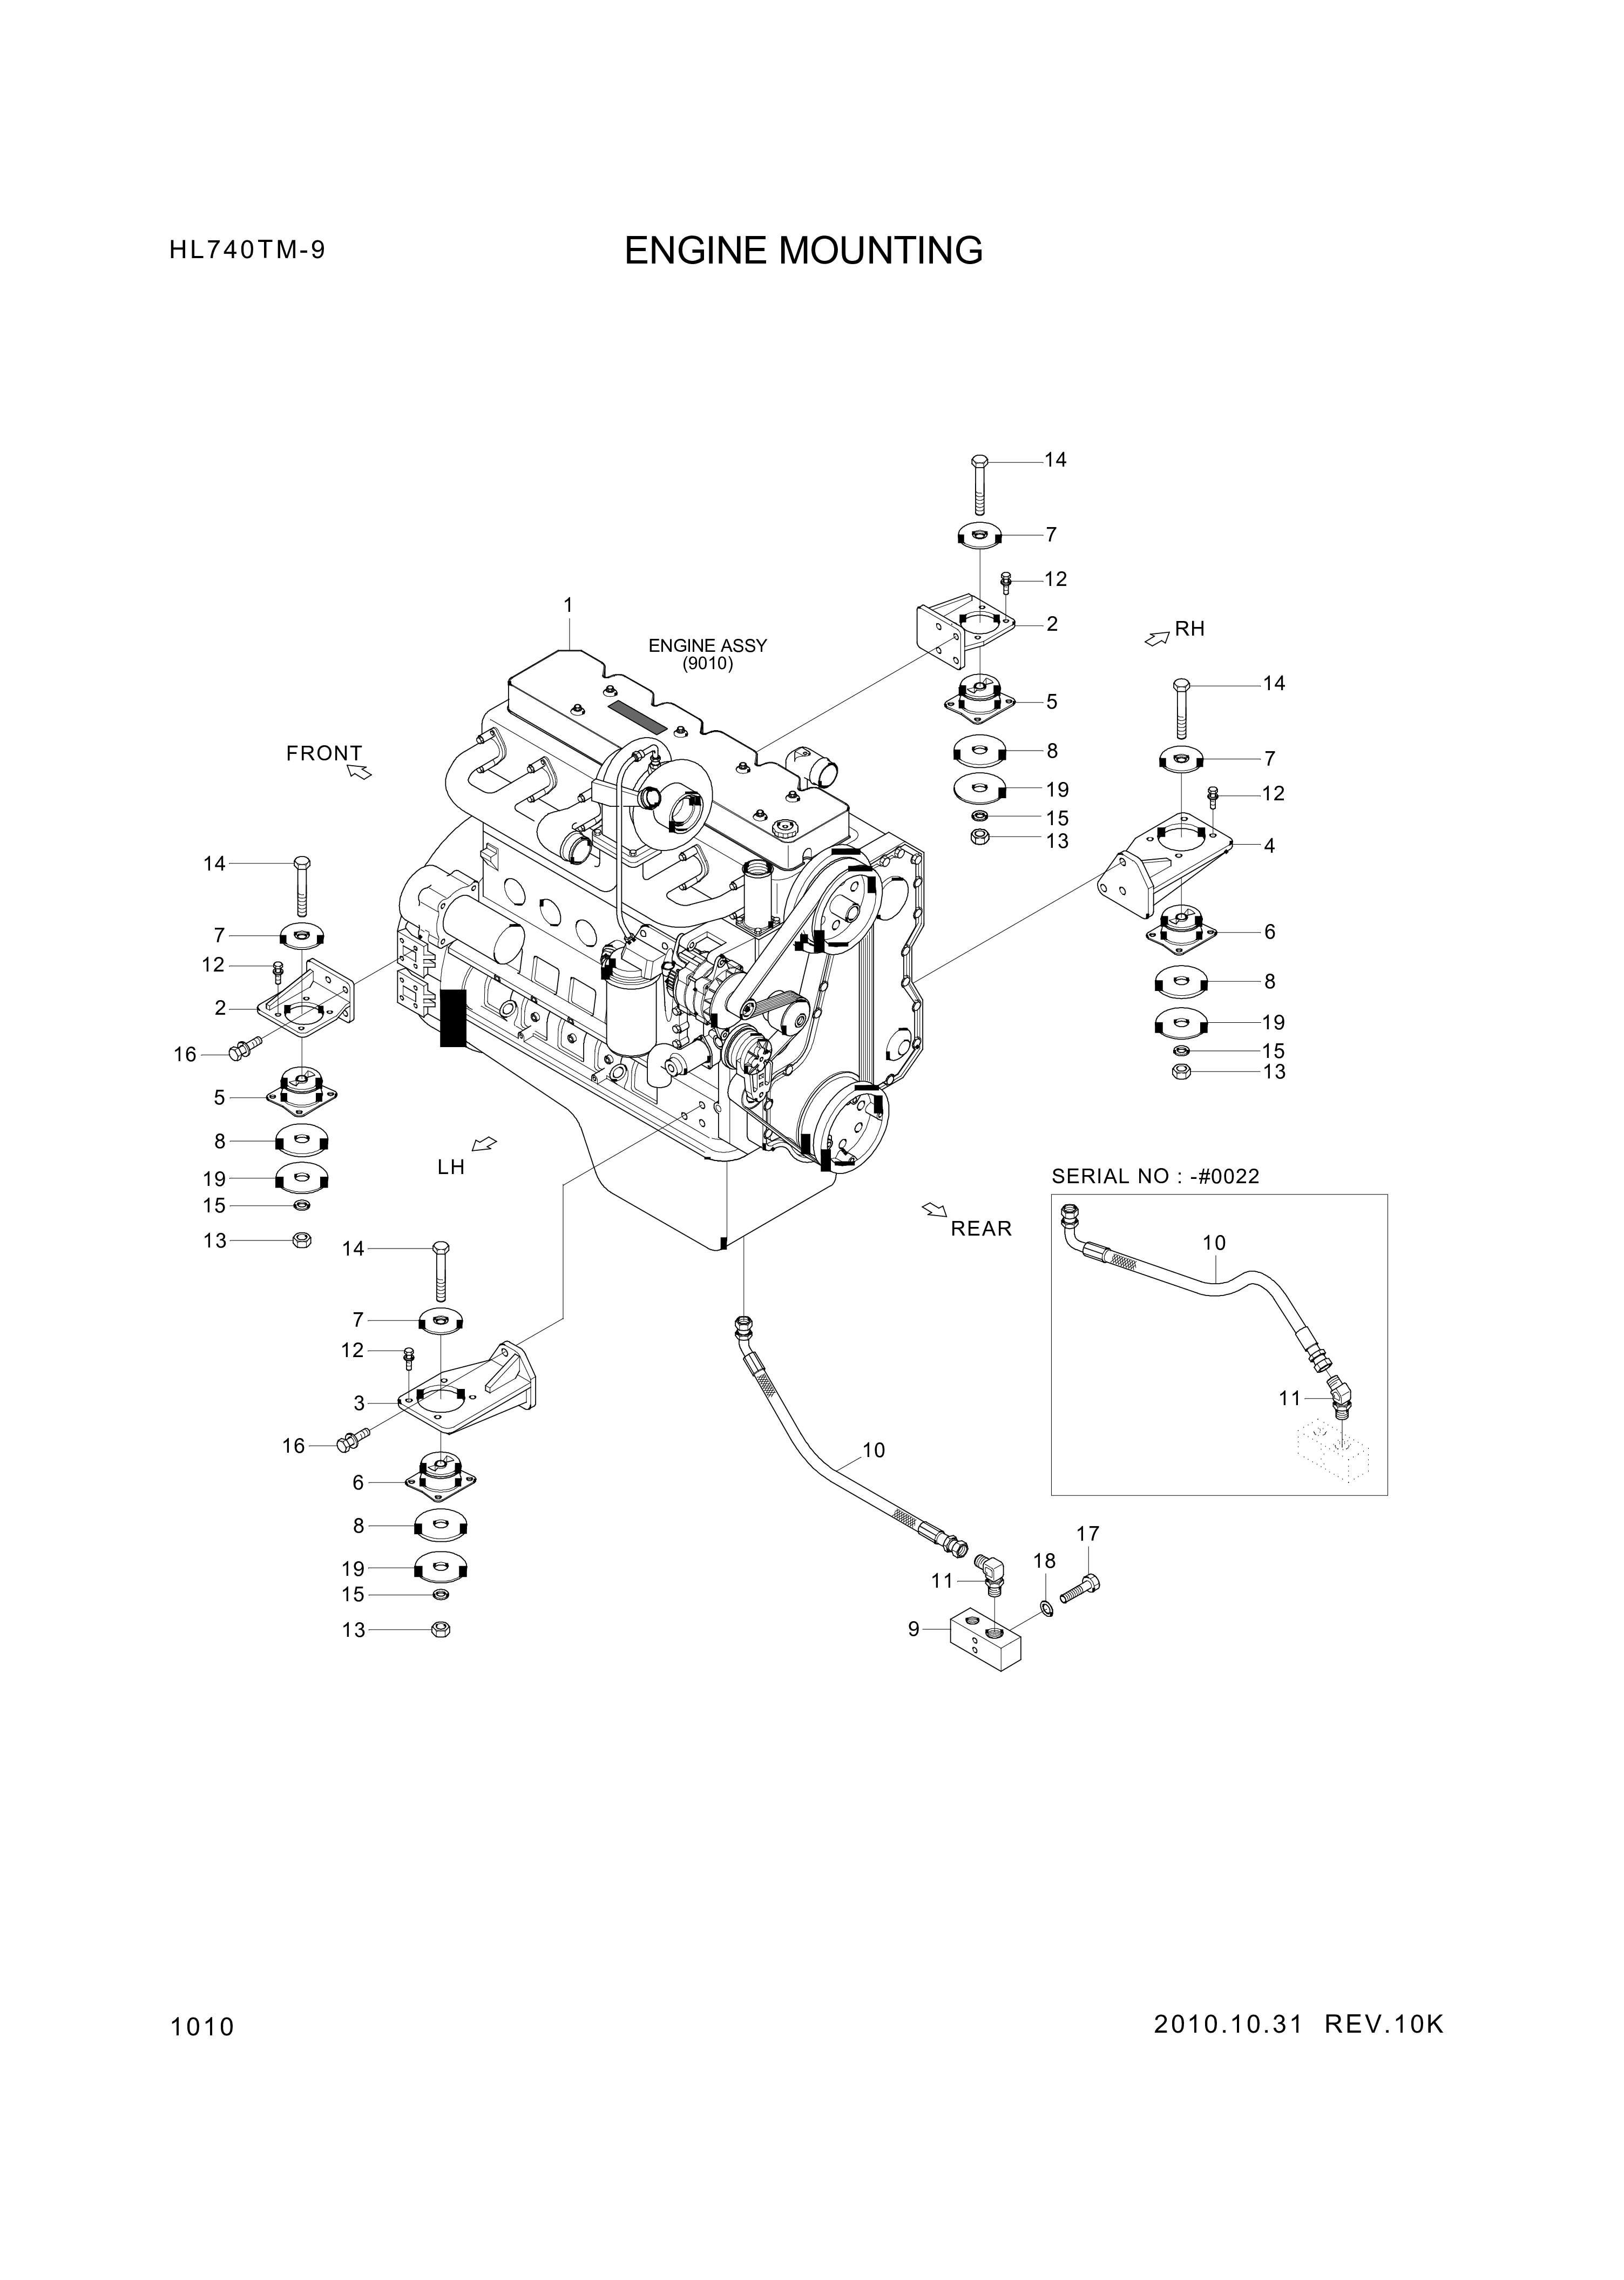 drawing for Hyundai Construction Equipment 11LN-00011 - ENGINE ASSY (figure 1)